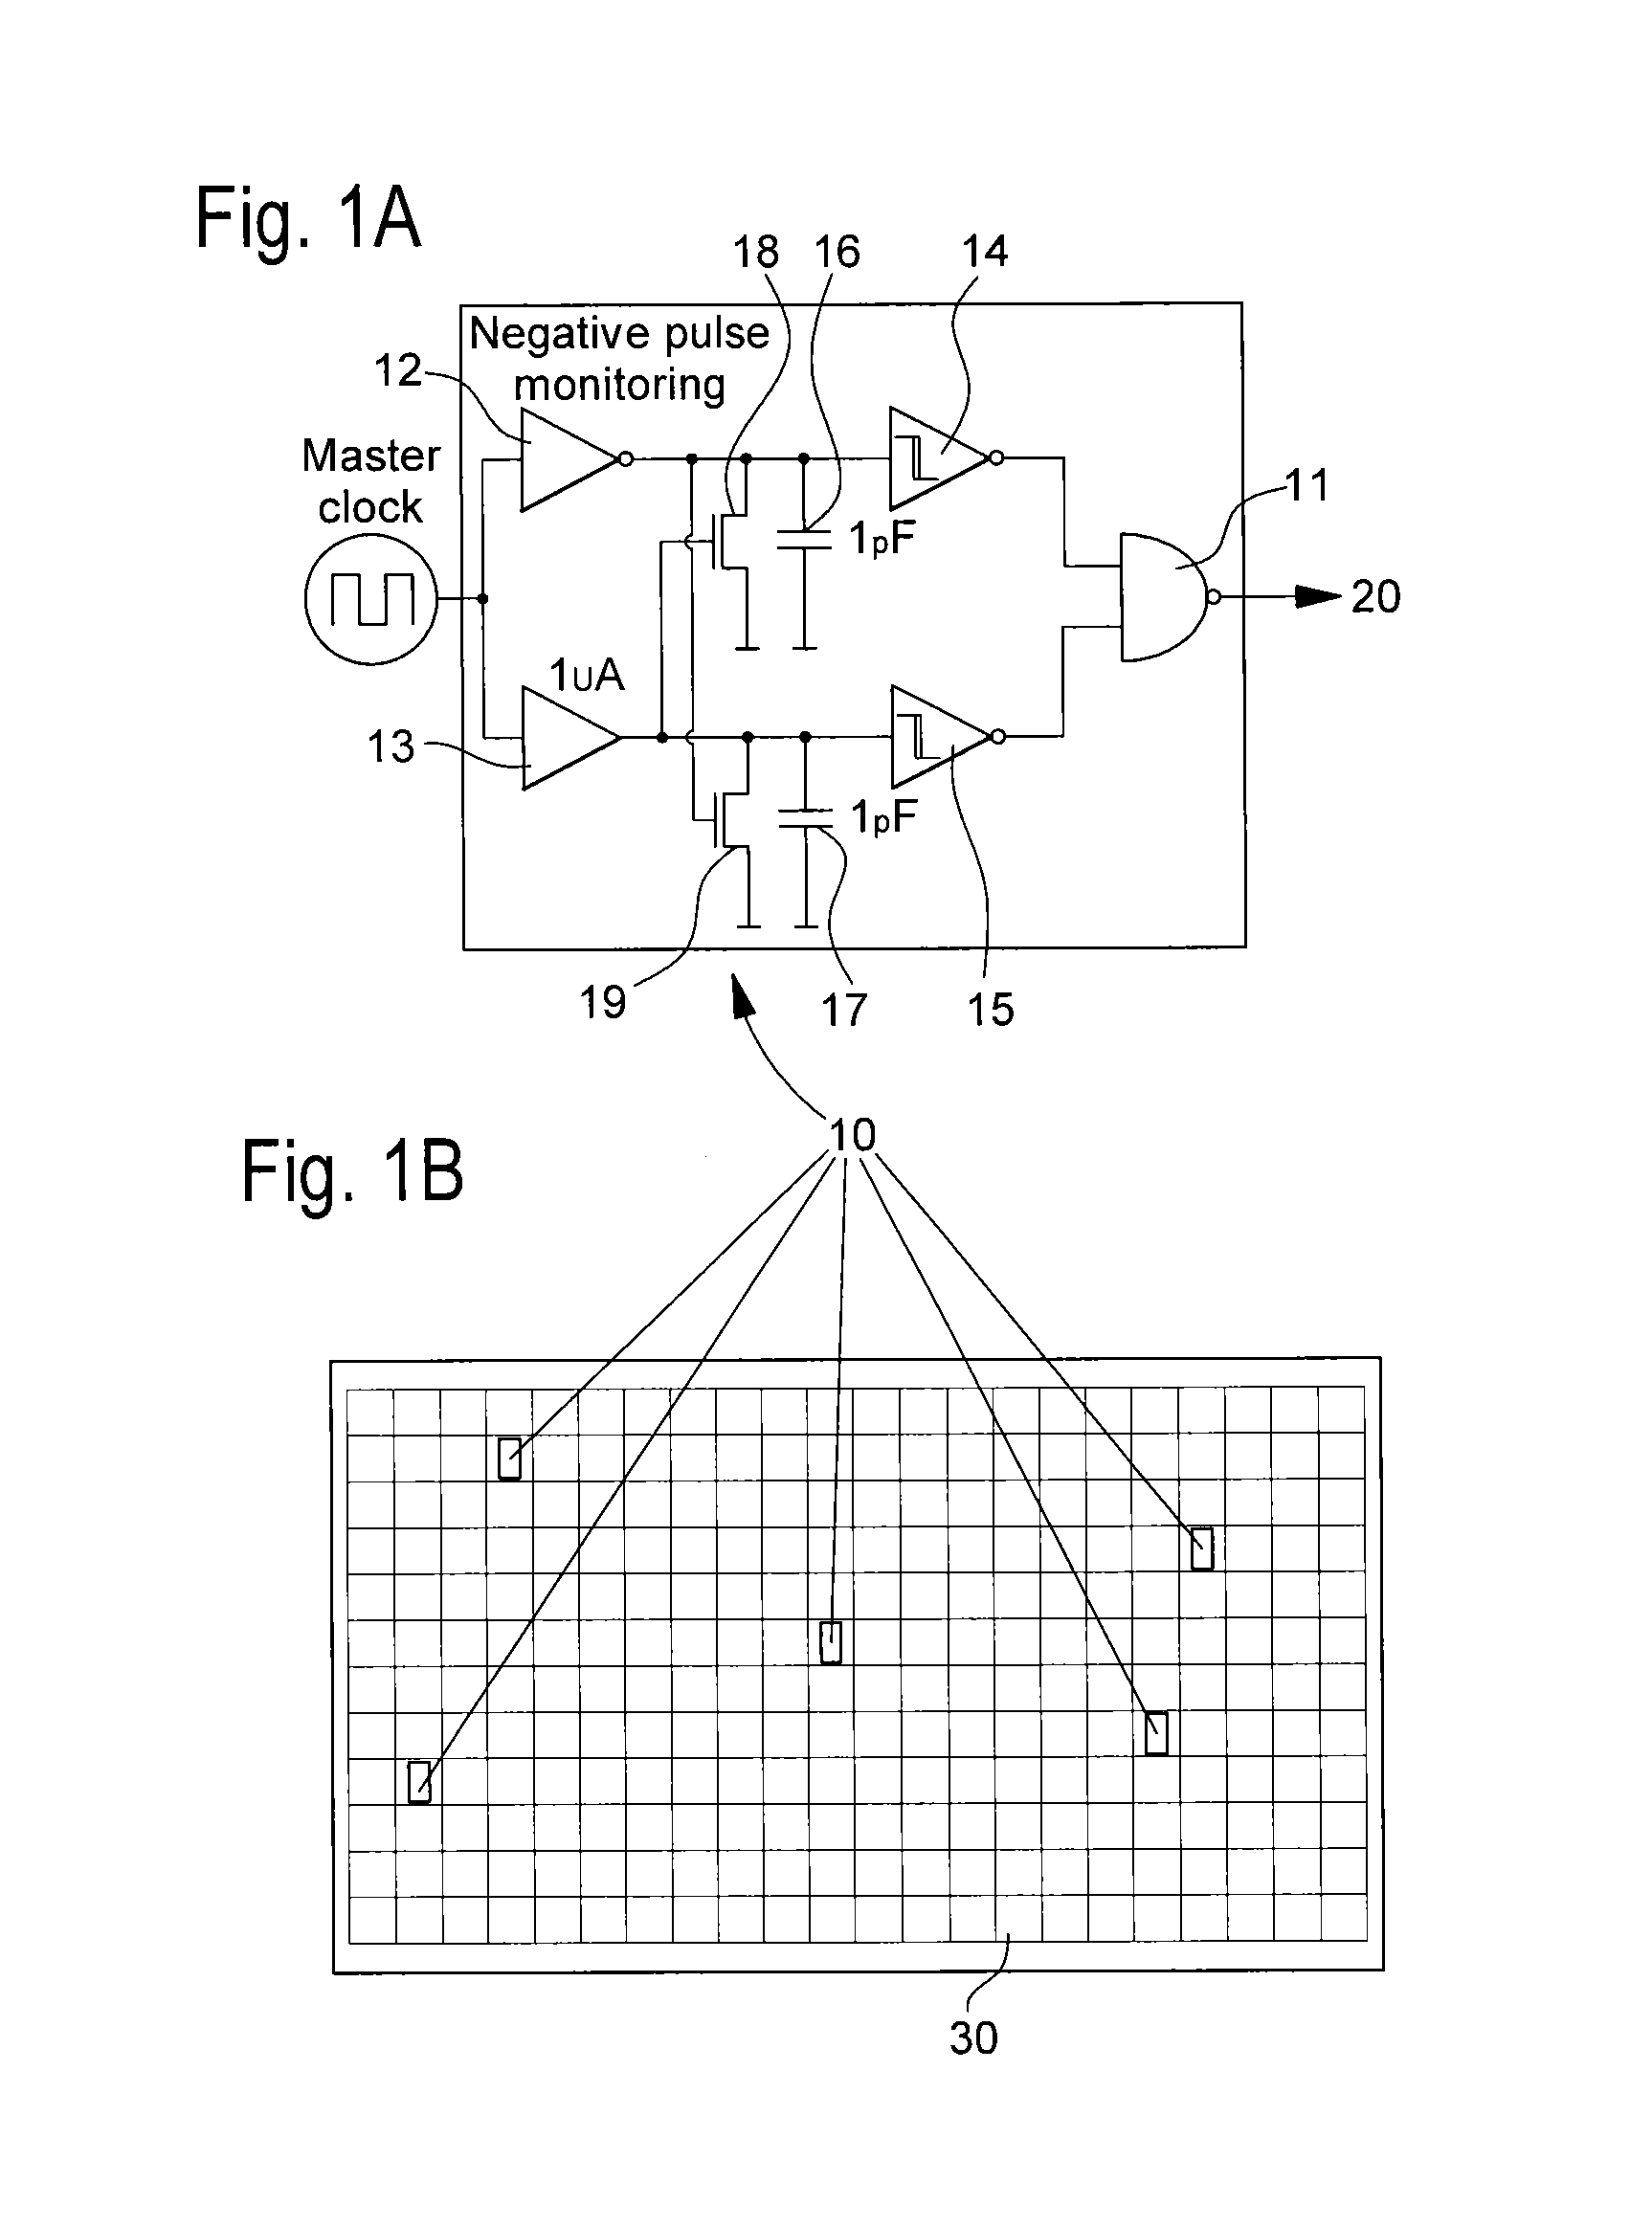 Integrated circuit with distributed clock tampering detectors